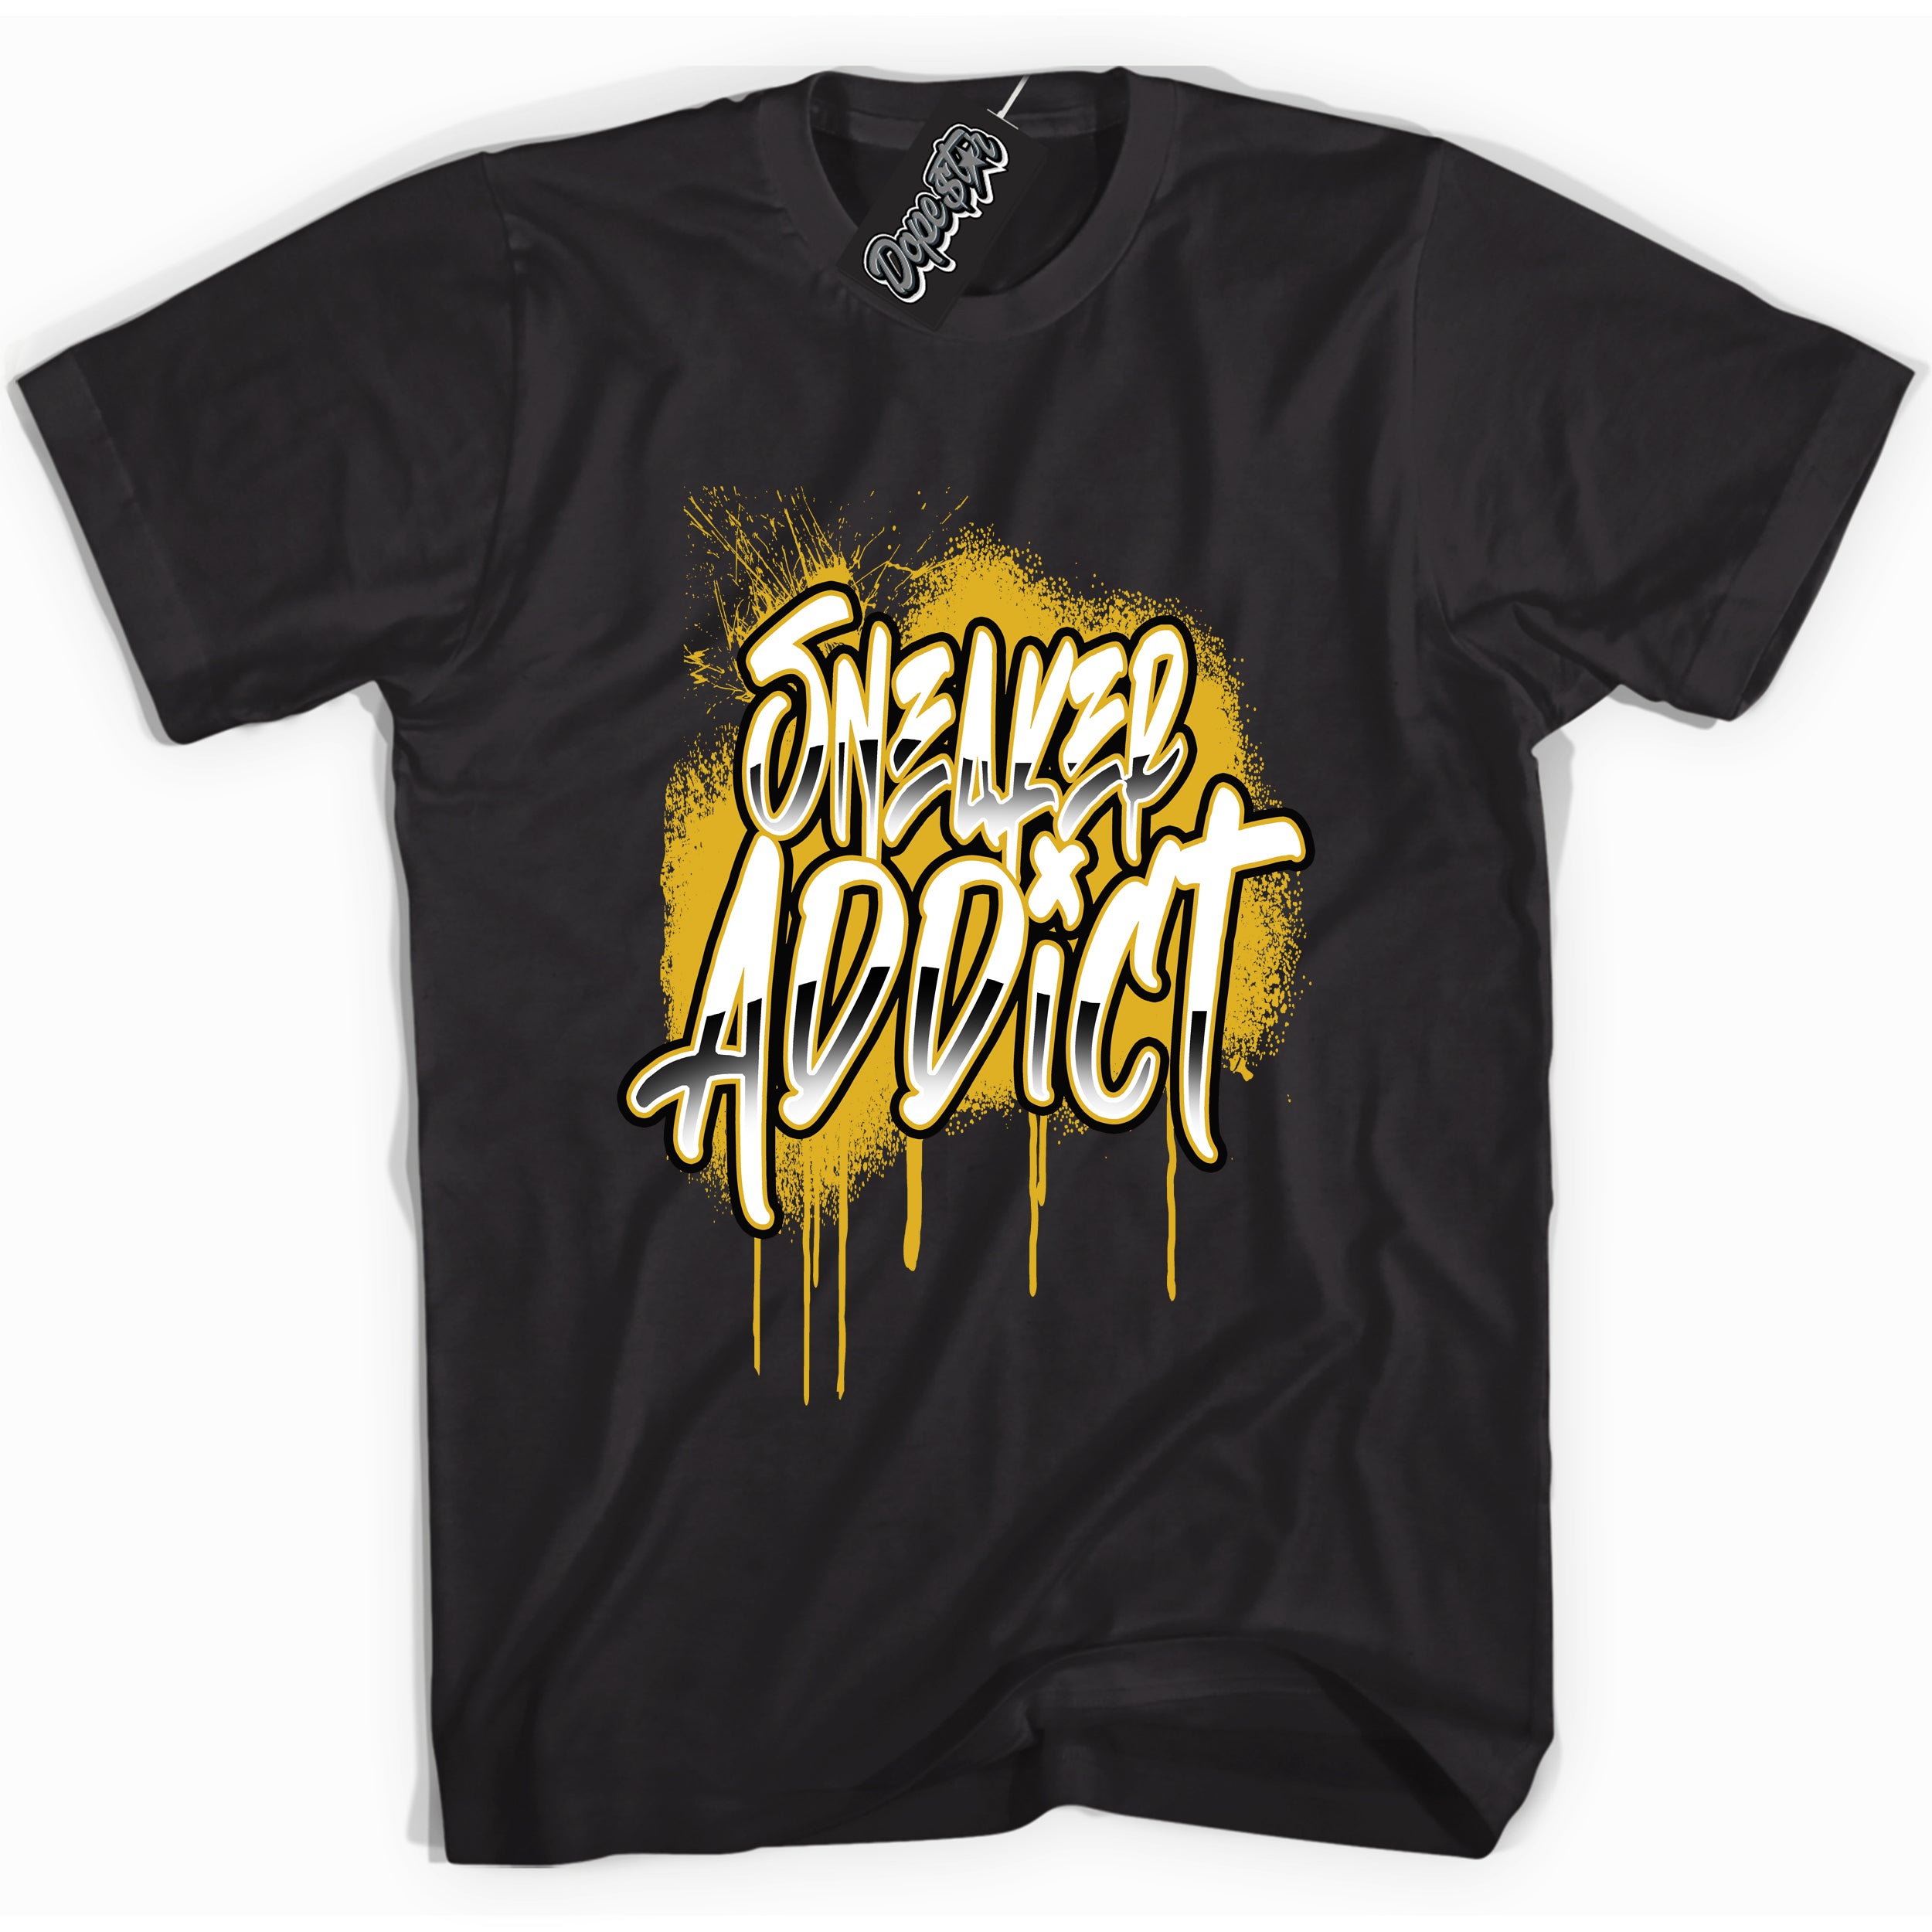 Cool Black Shirt with “ Sneaker Addict ” design that perfectly matches Yellow Ochre 6s Sneakers.